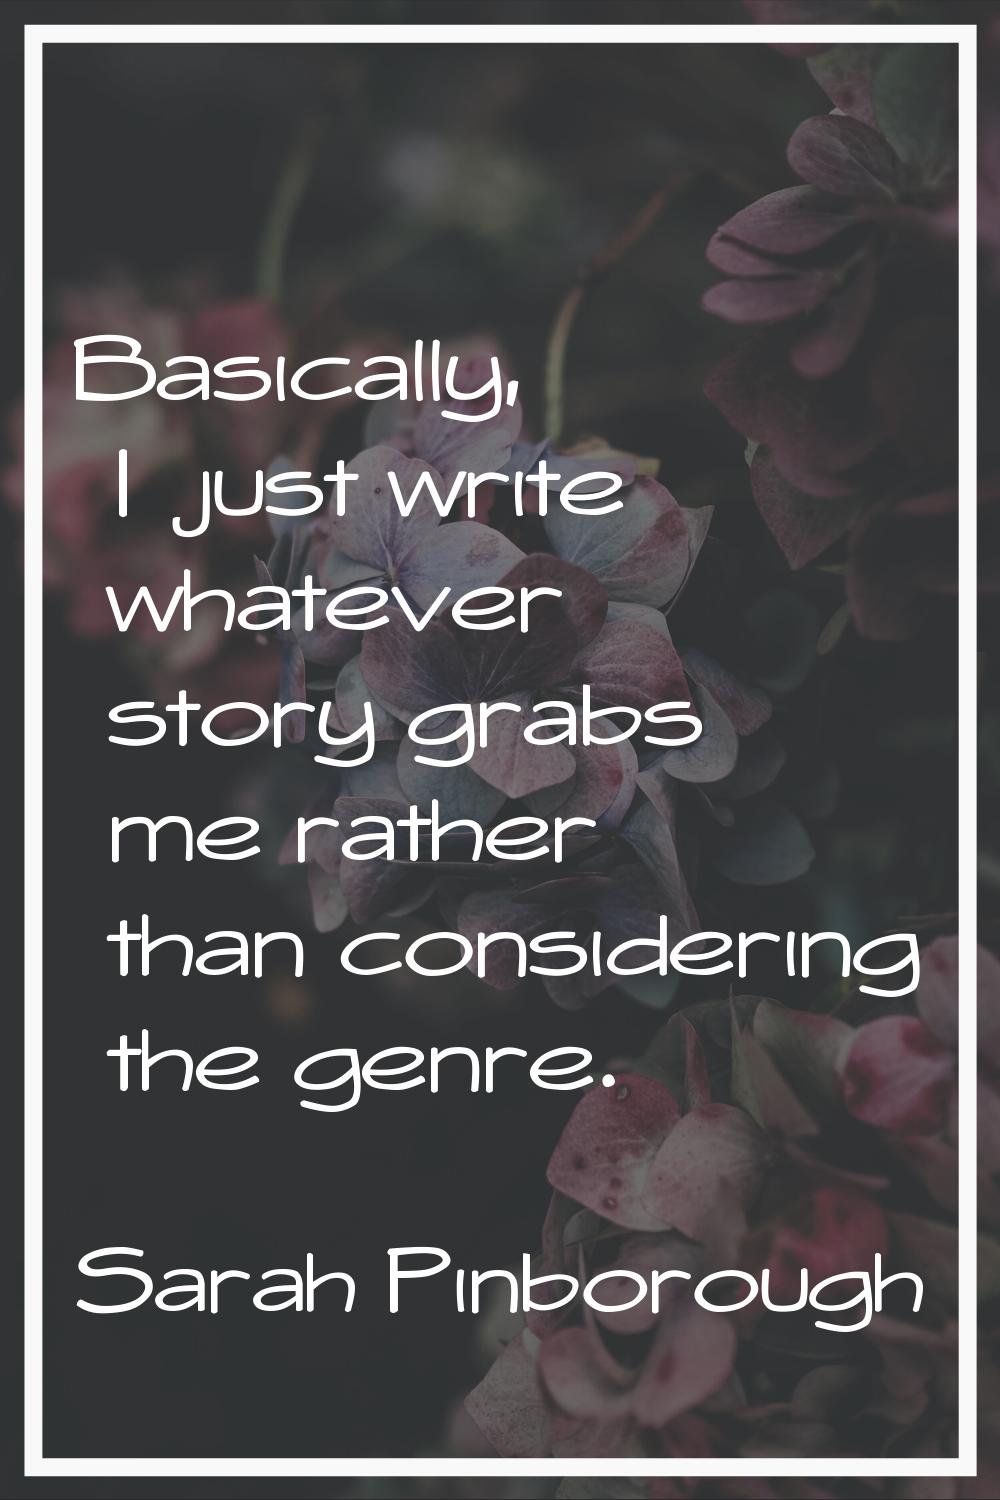 Basically, I just write whatever story grabs me rather than considering the genre.